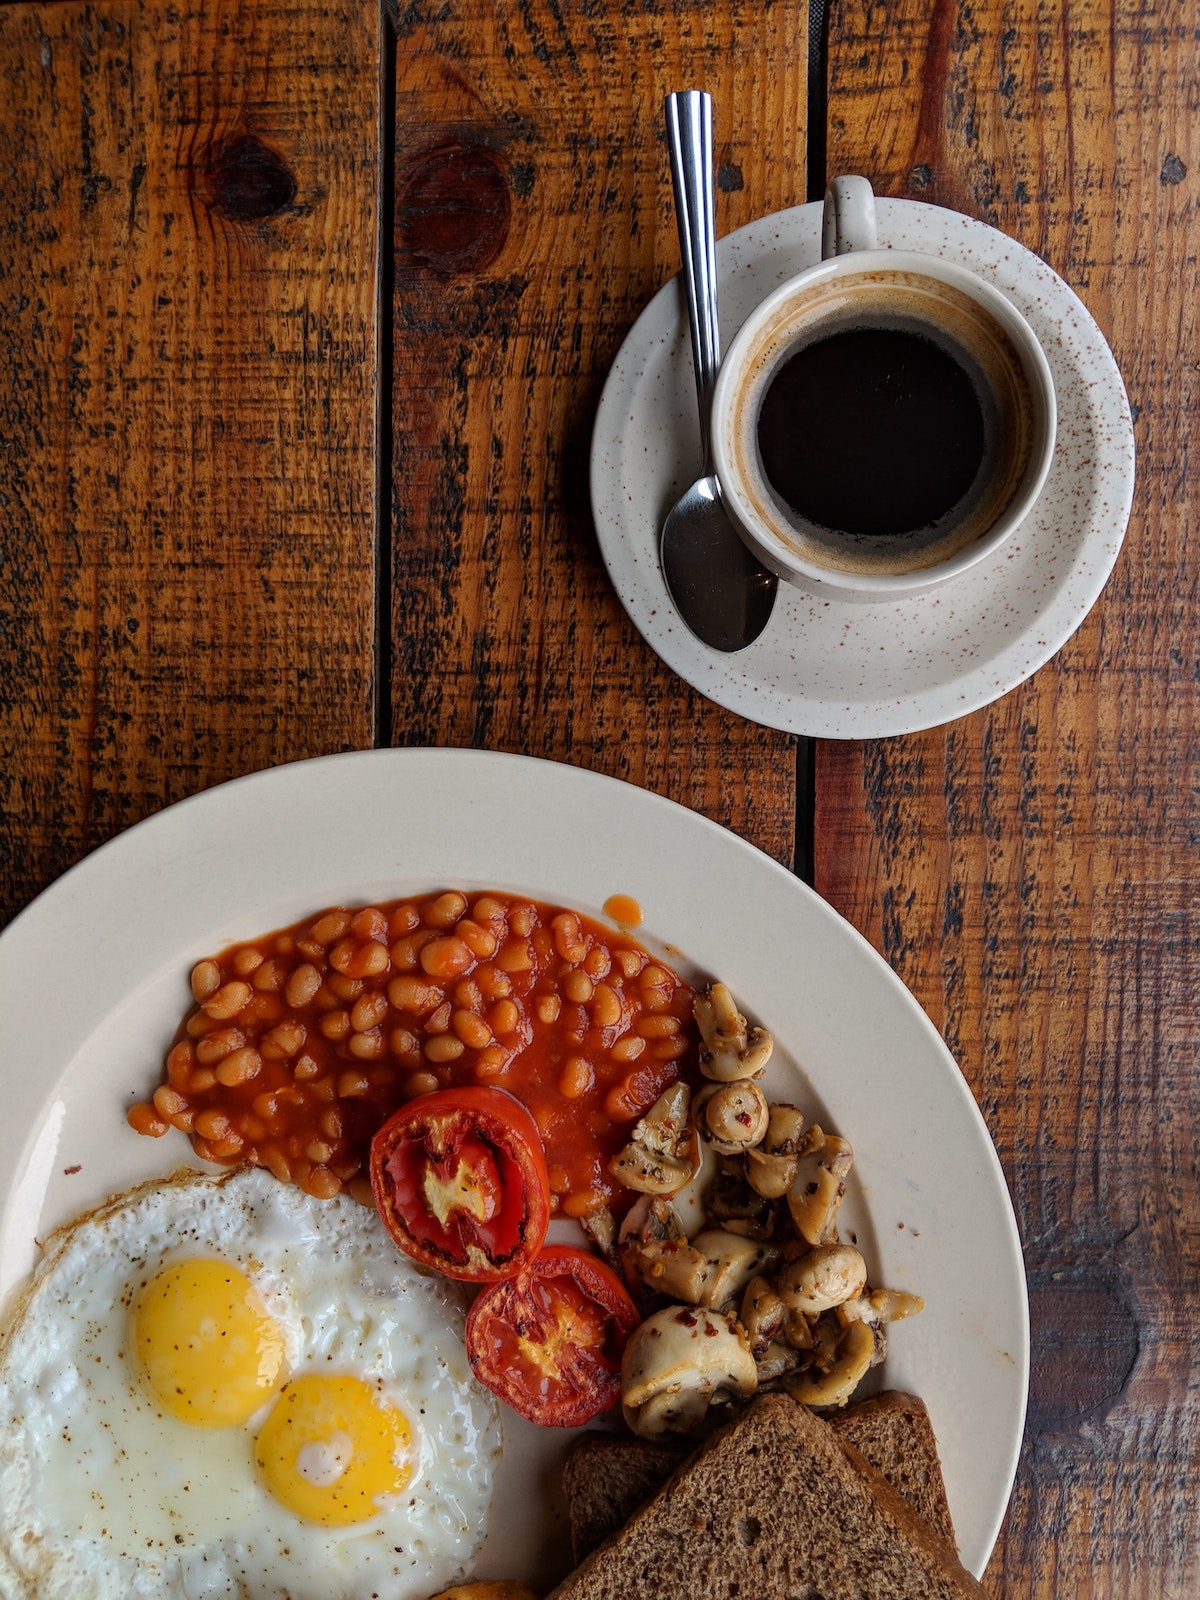 Overhead shot of a full English breakfast including beans, eggs, mushrooms, and tomatoes on a white plate beside a cup of coffee